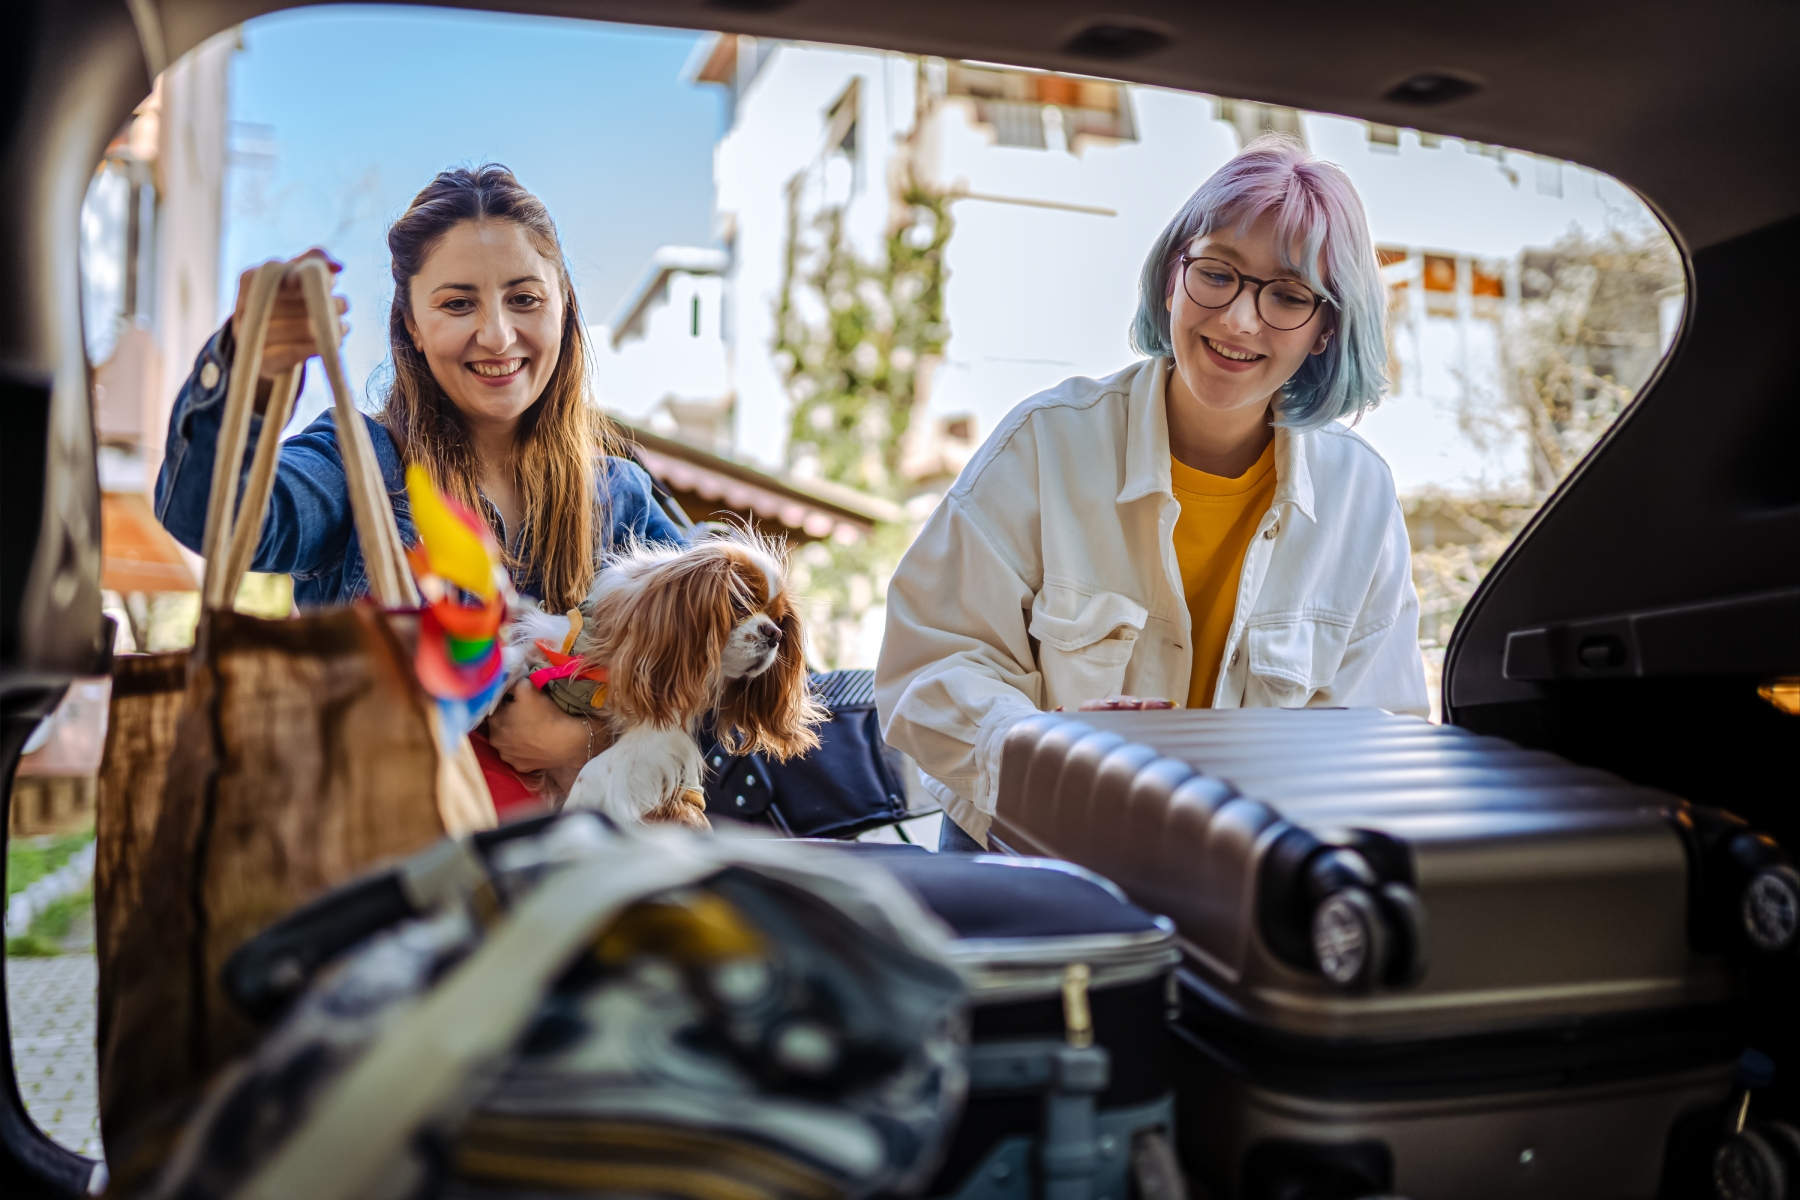 Two women load a car with bags, suitcases, and a Cavalier King Charles Spaniel